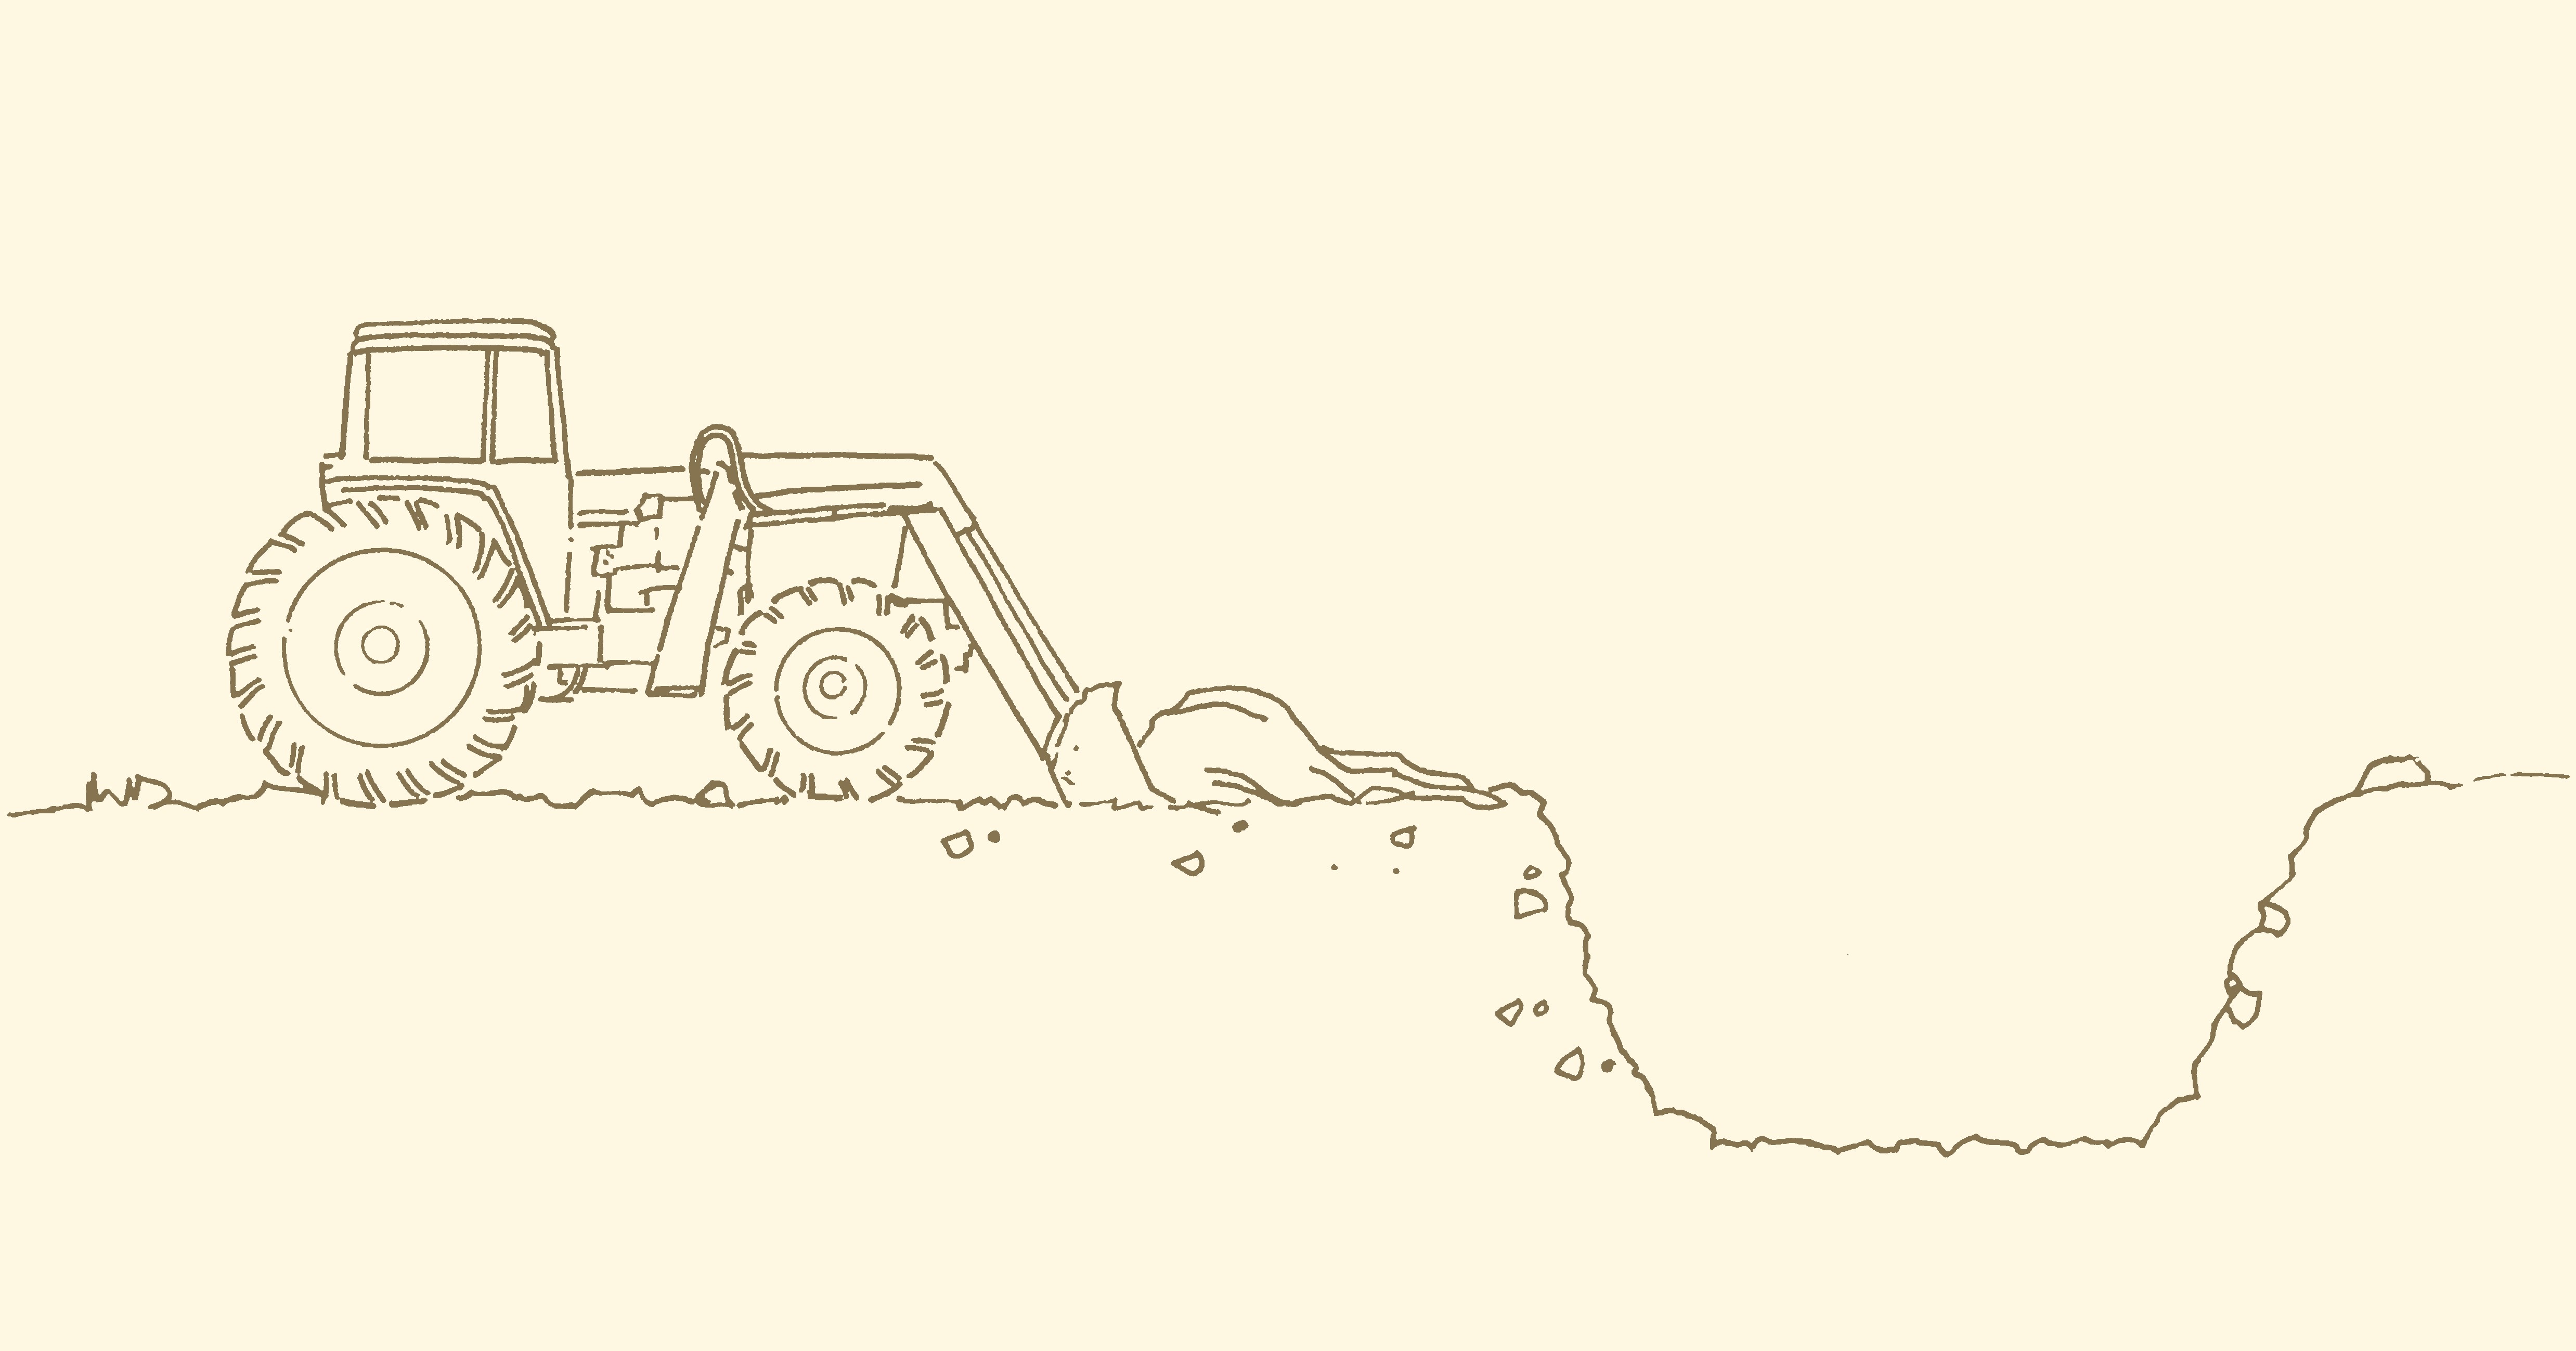 This is an artist’s rendition of a tractor pushing a dead cow into a burial pit.